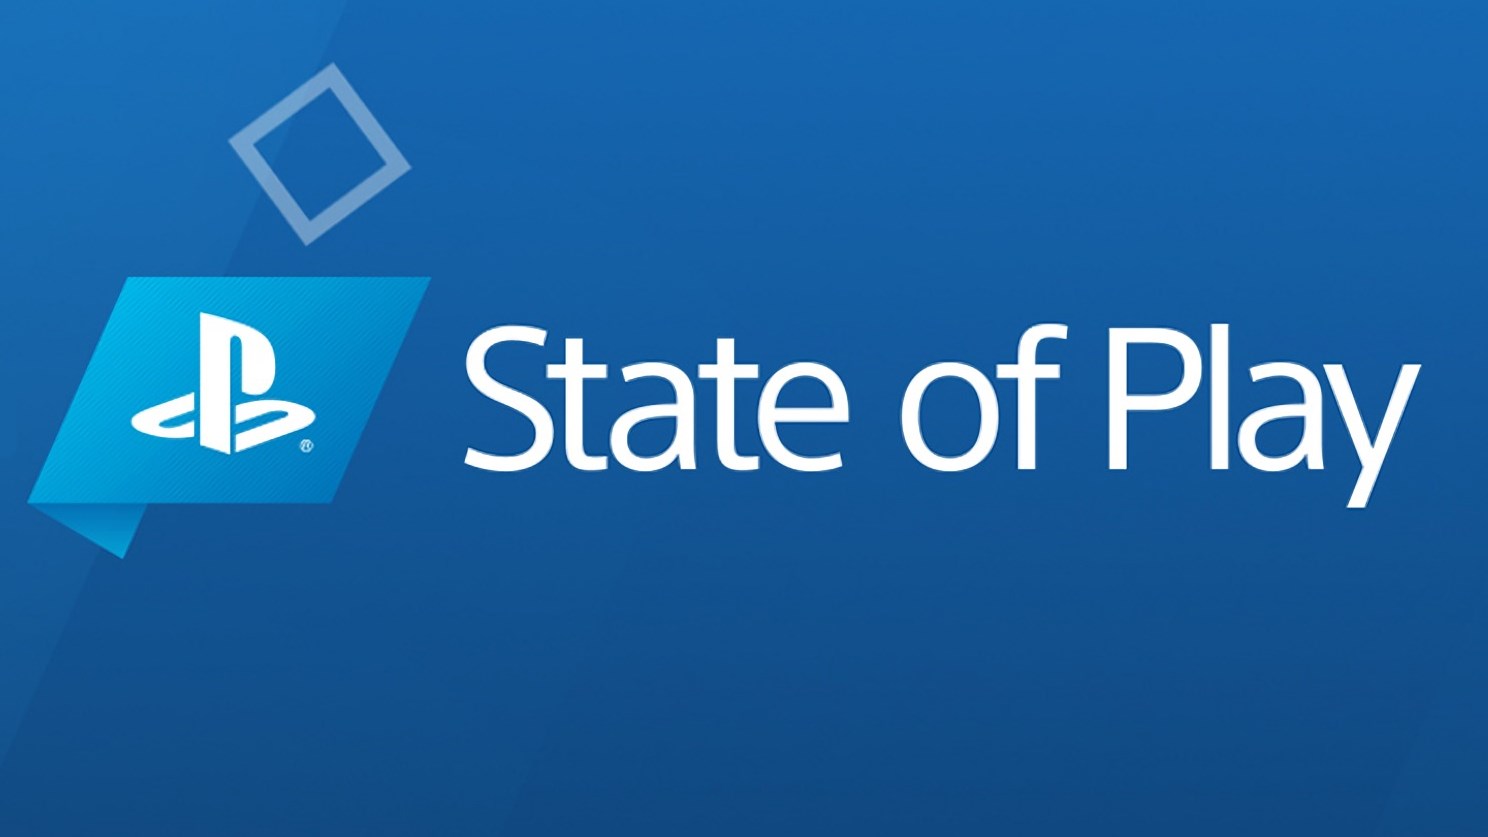 New PlayStation State of Play coming this Thursday, will focus on PS4